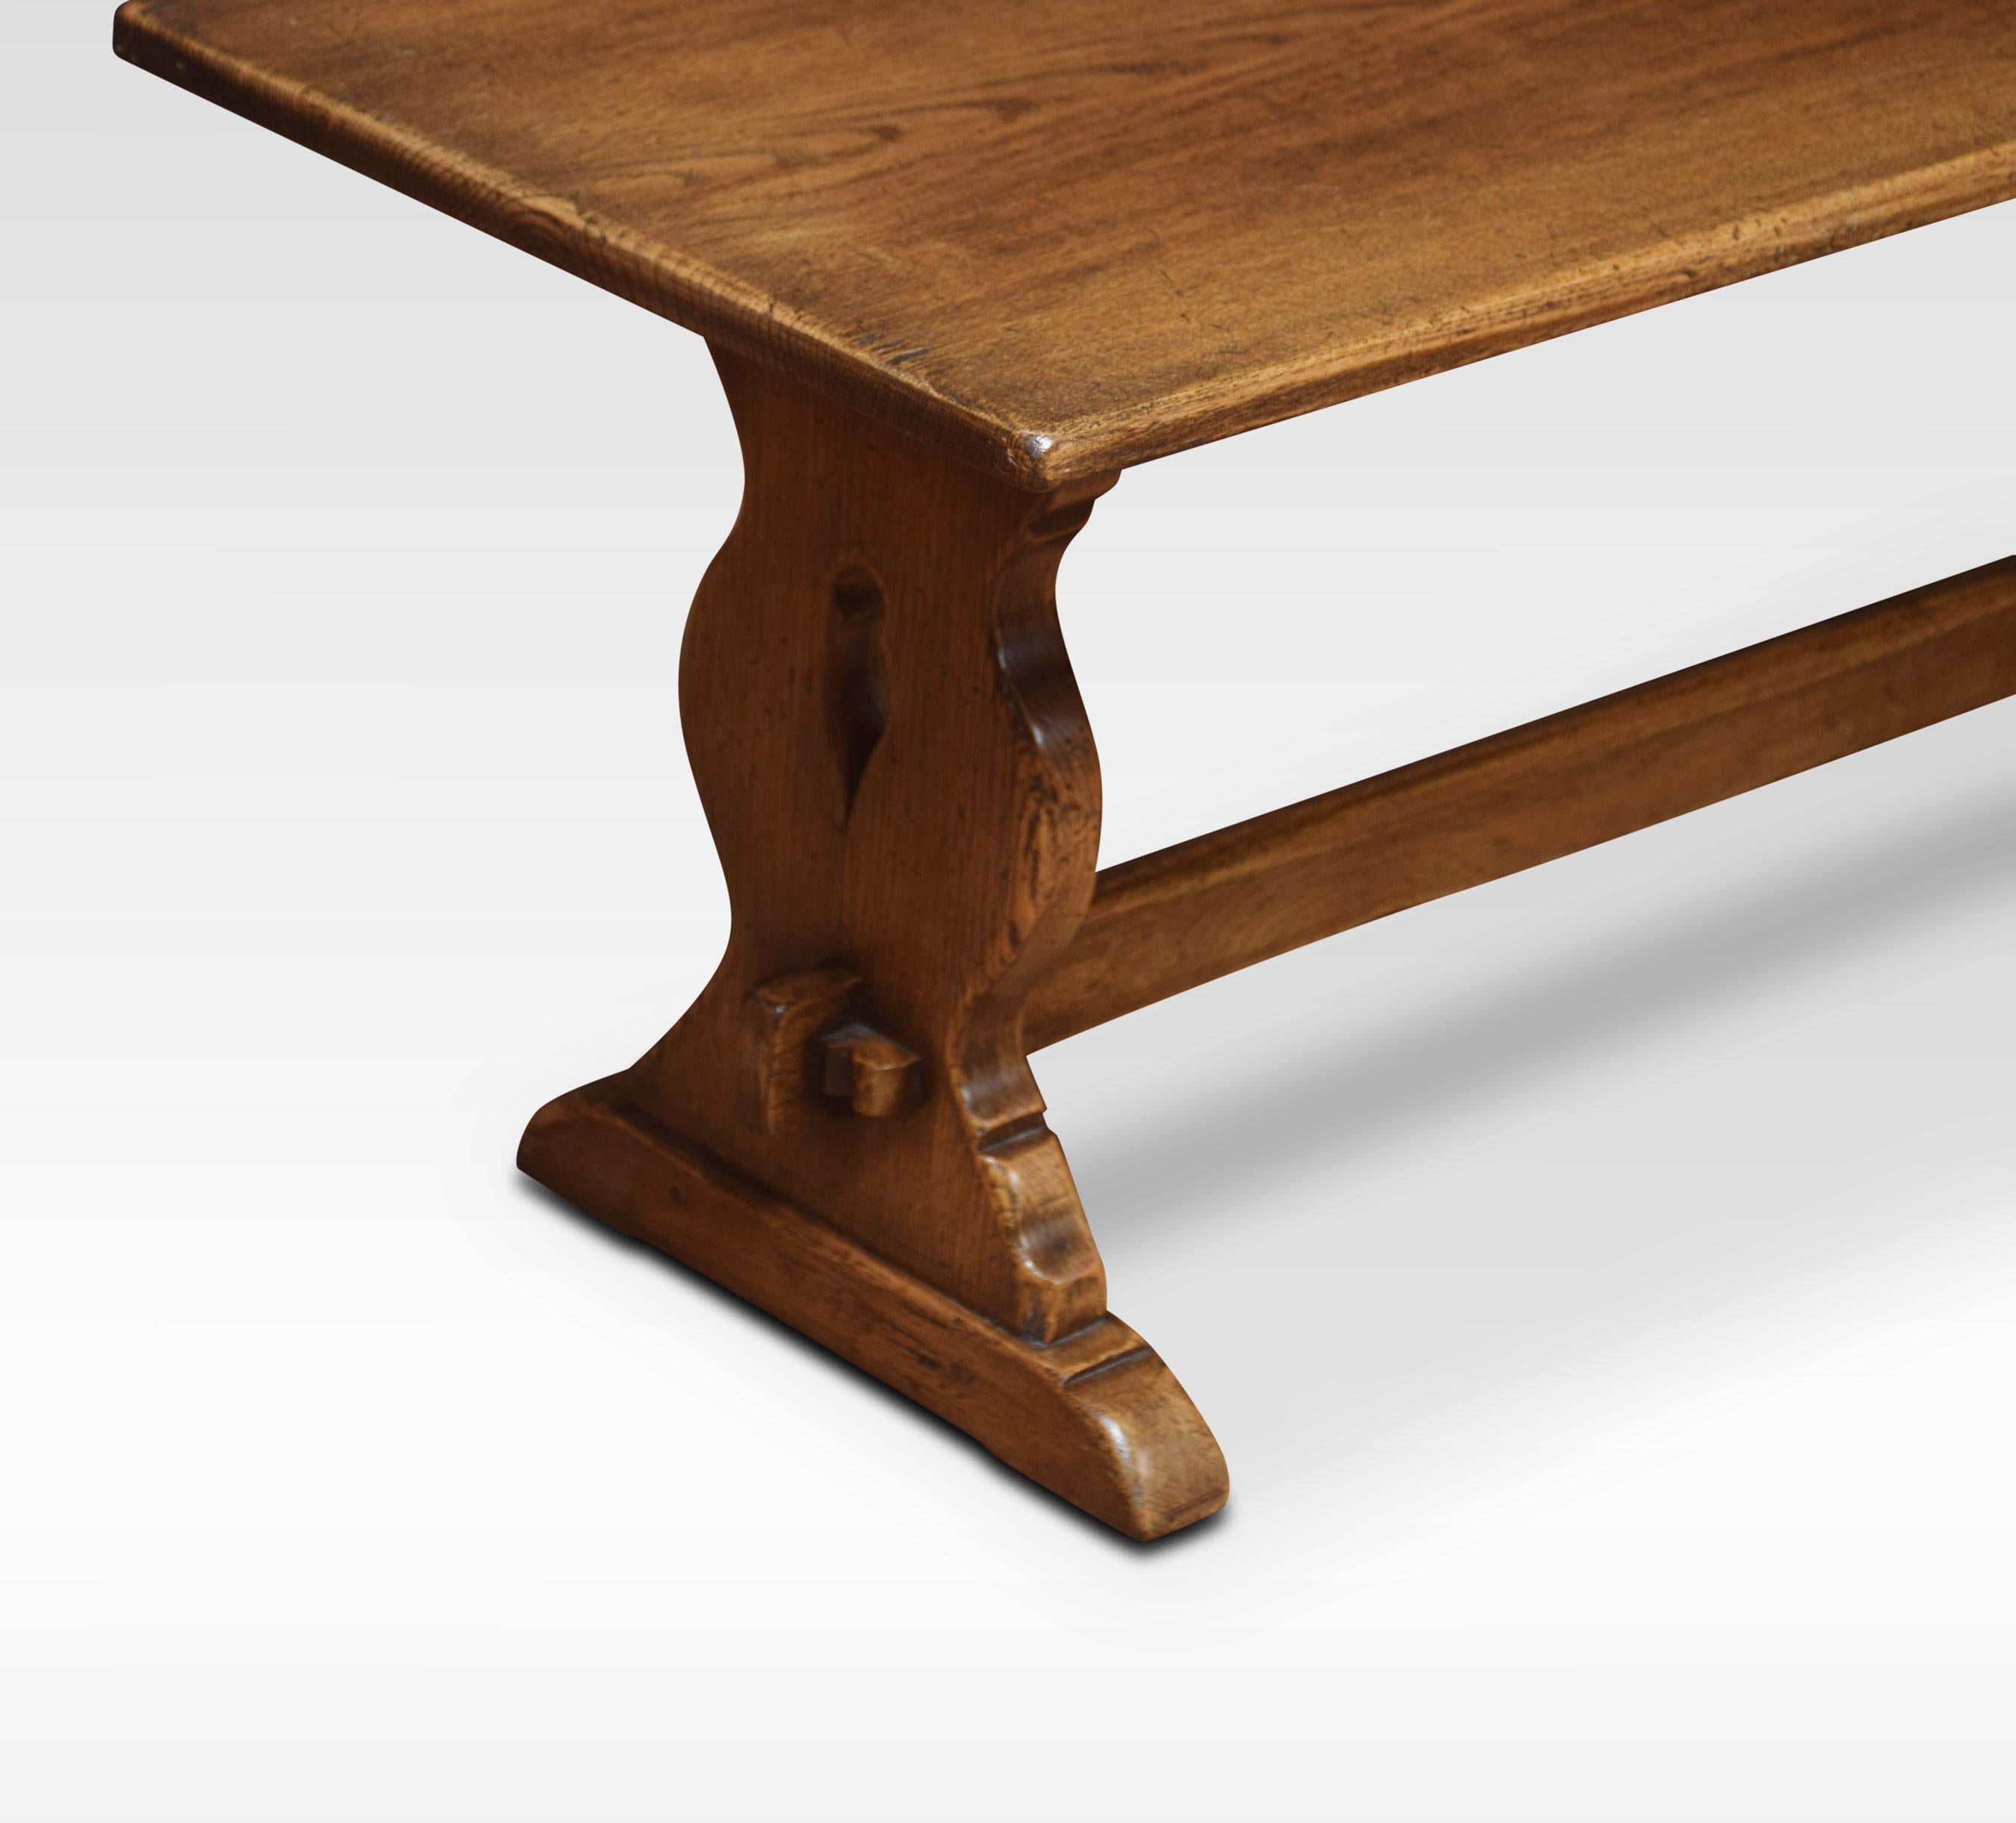 Oak refectory coffee table, the rectangular top, raised on platform end supports with trestle legs united by stretcher.
Dimensions:
Height 17 inches
Width 41 inches
Depth 17 inches.